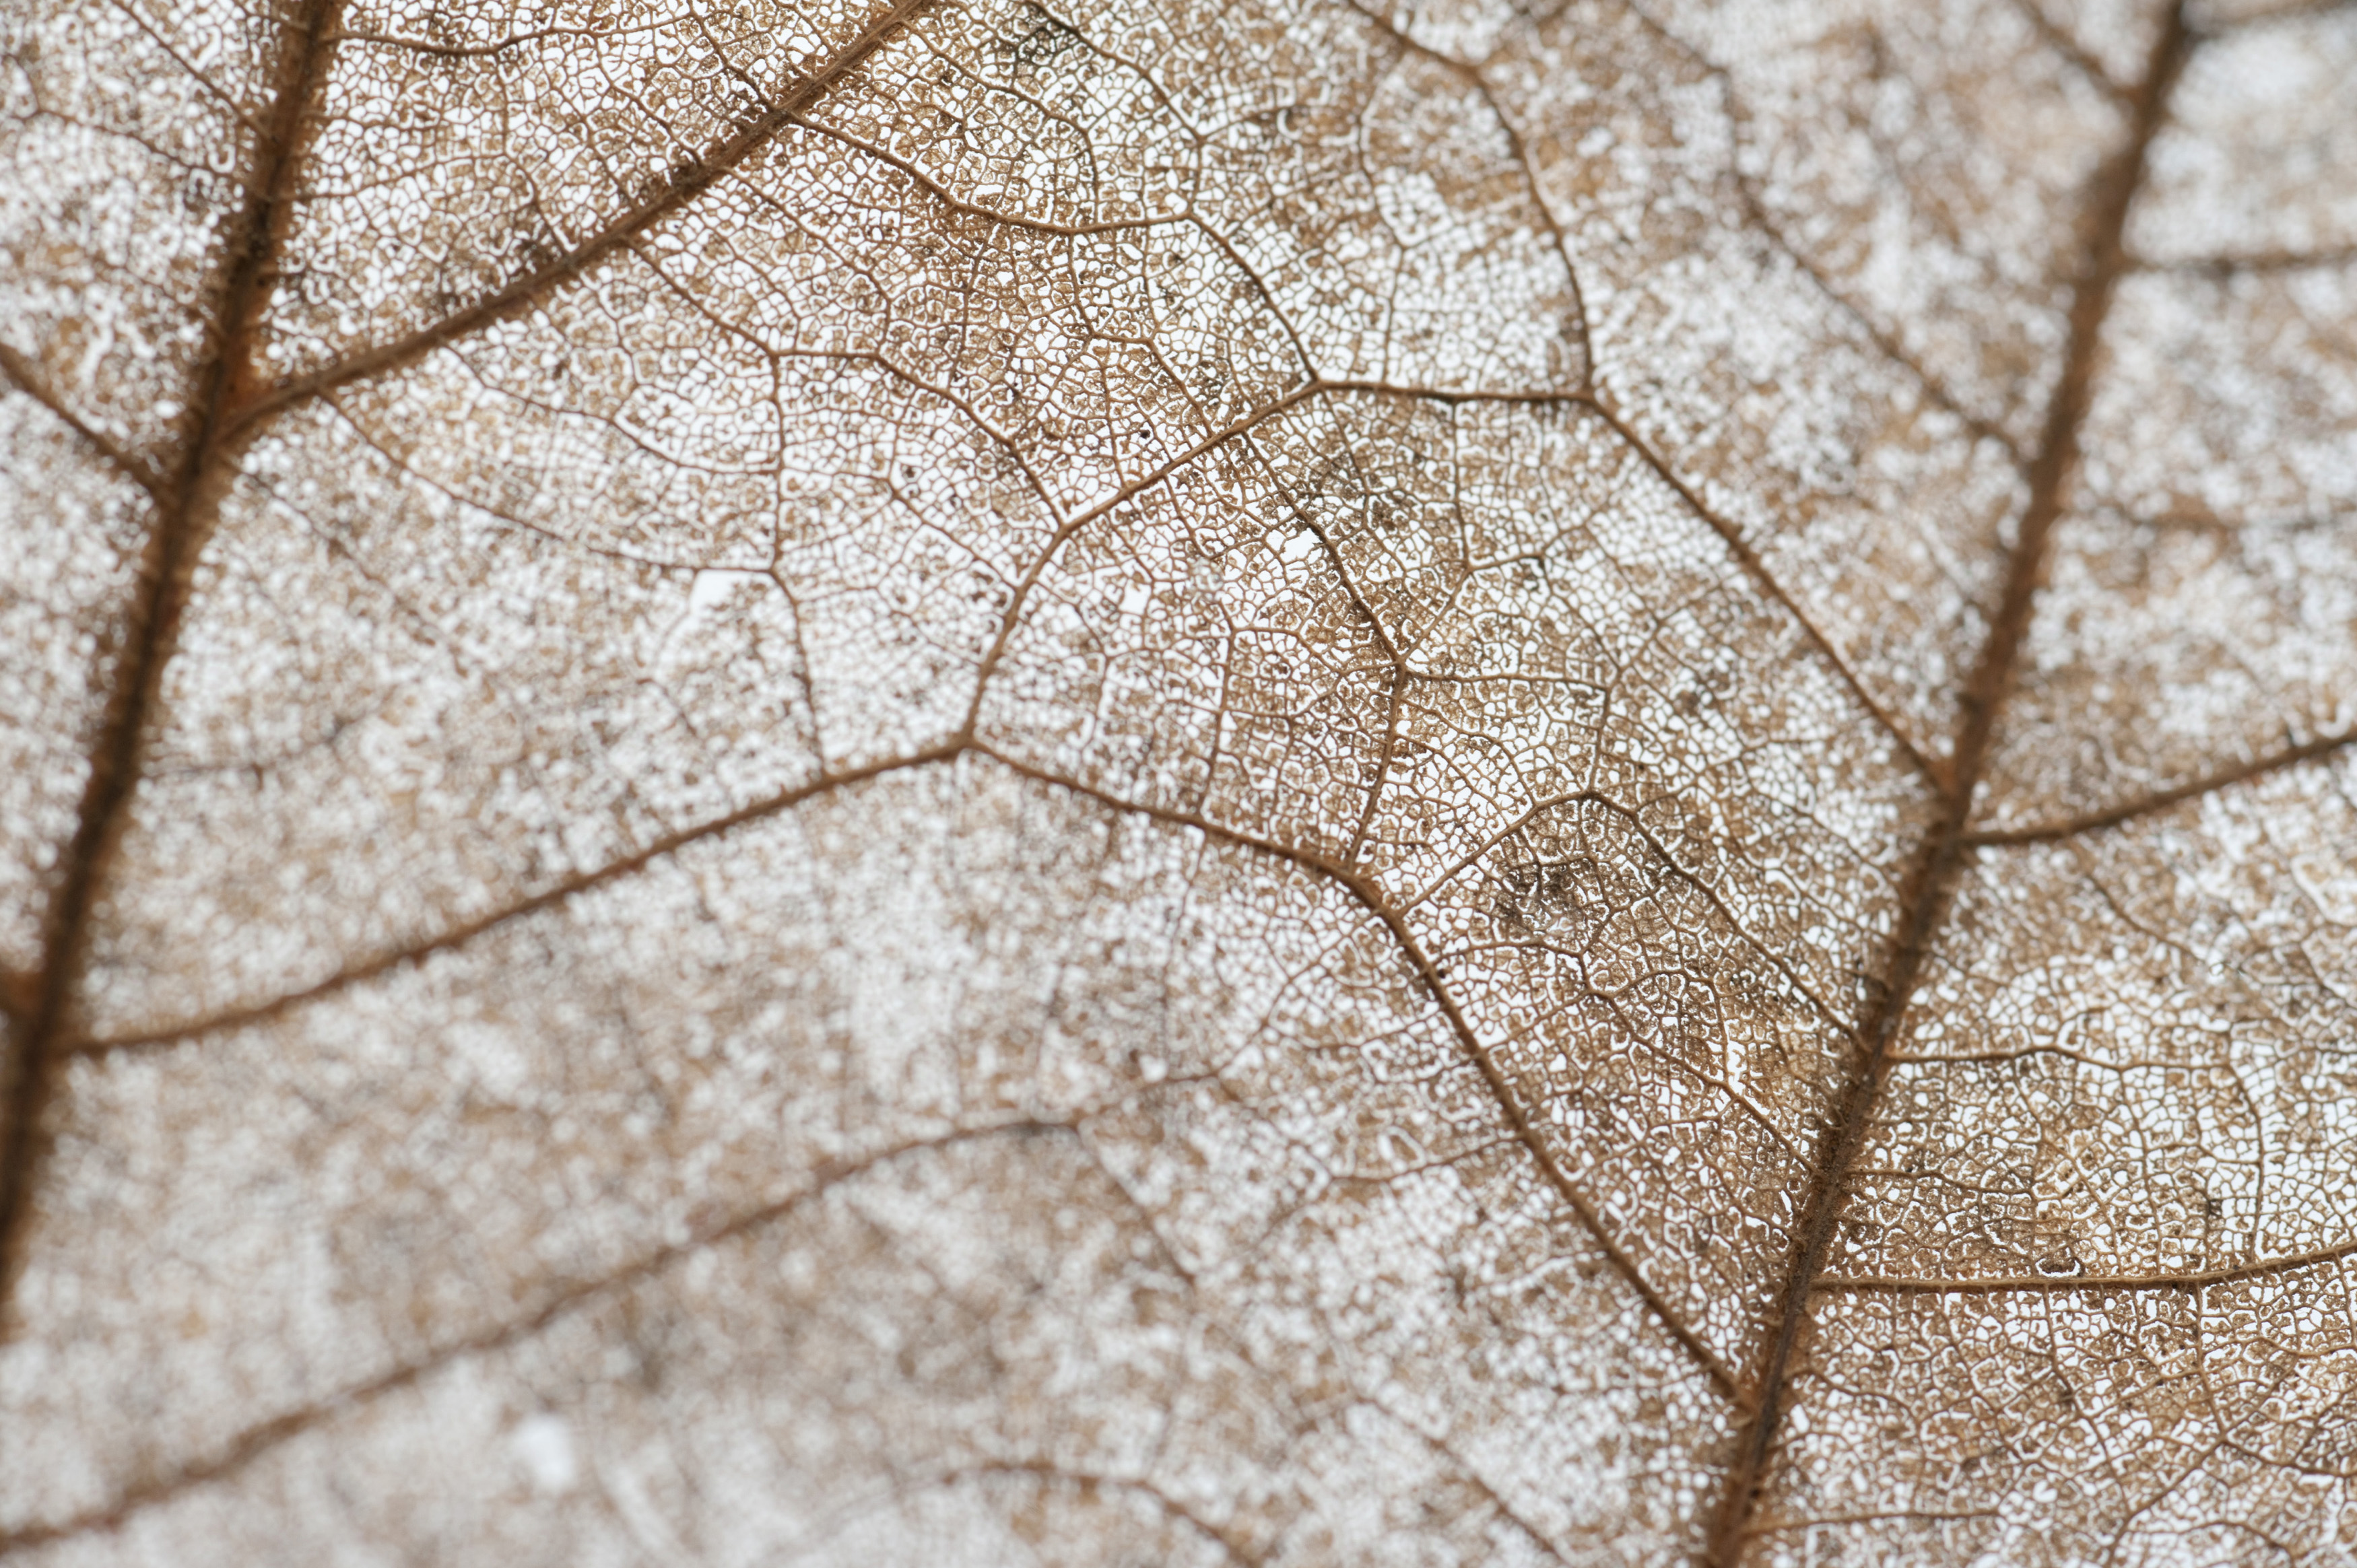 Free Stock Photo 11850 Vein detail on a dead leaf | freeimageslive